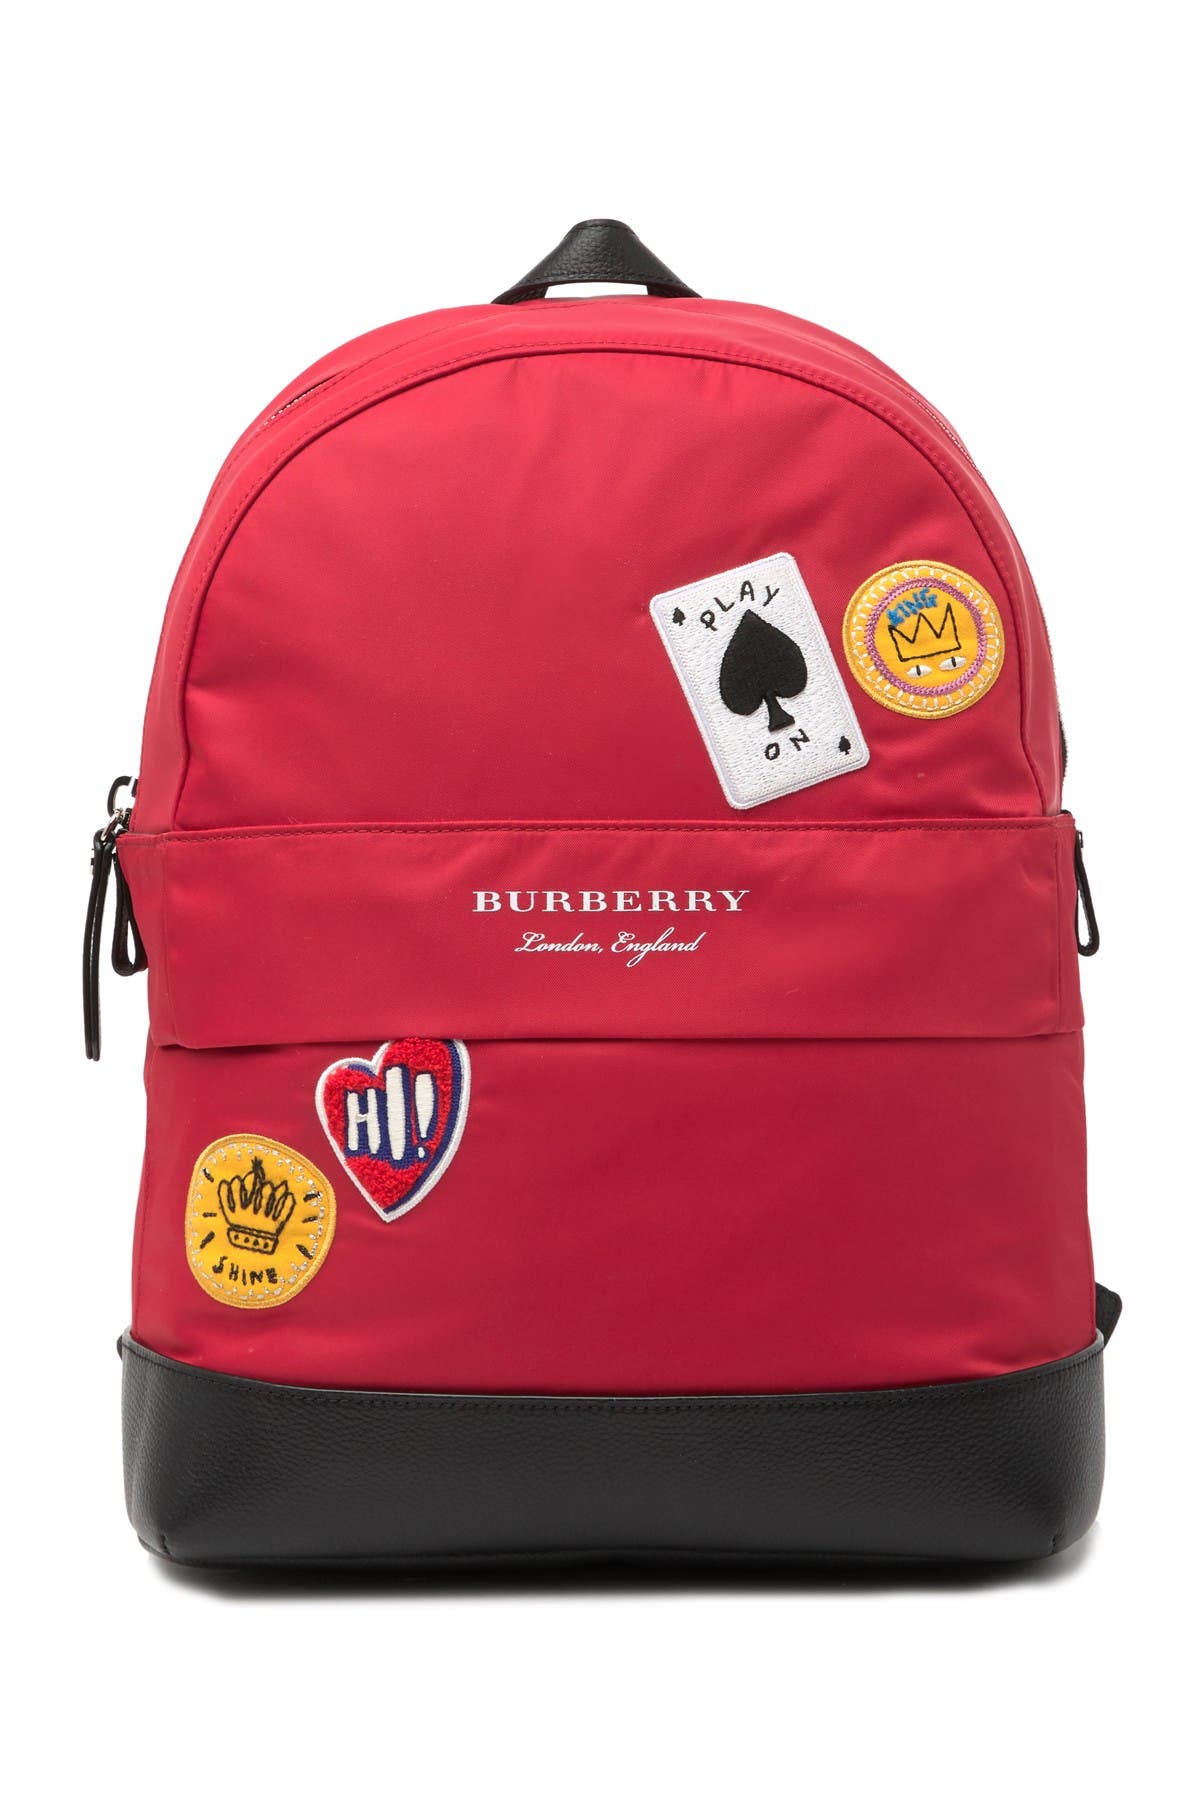 Burberry Nico Backpack Discount, SAVE 54%.